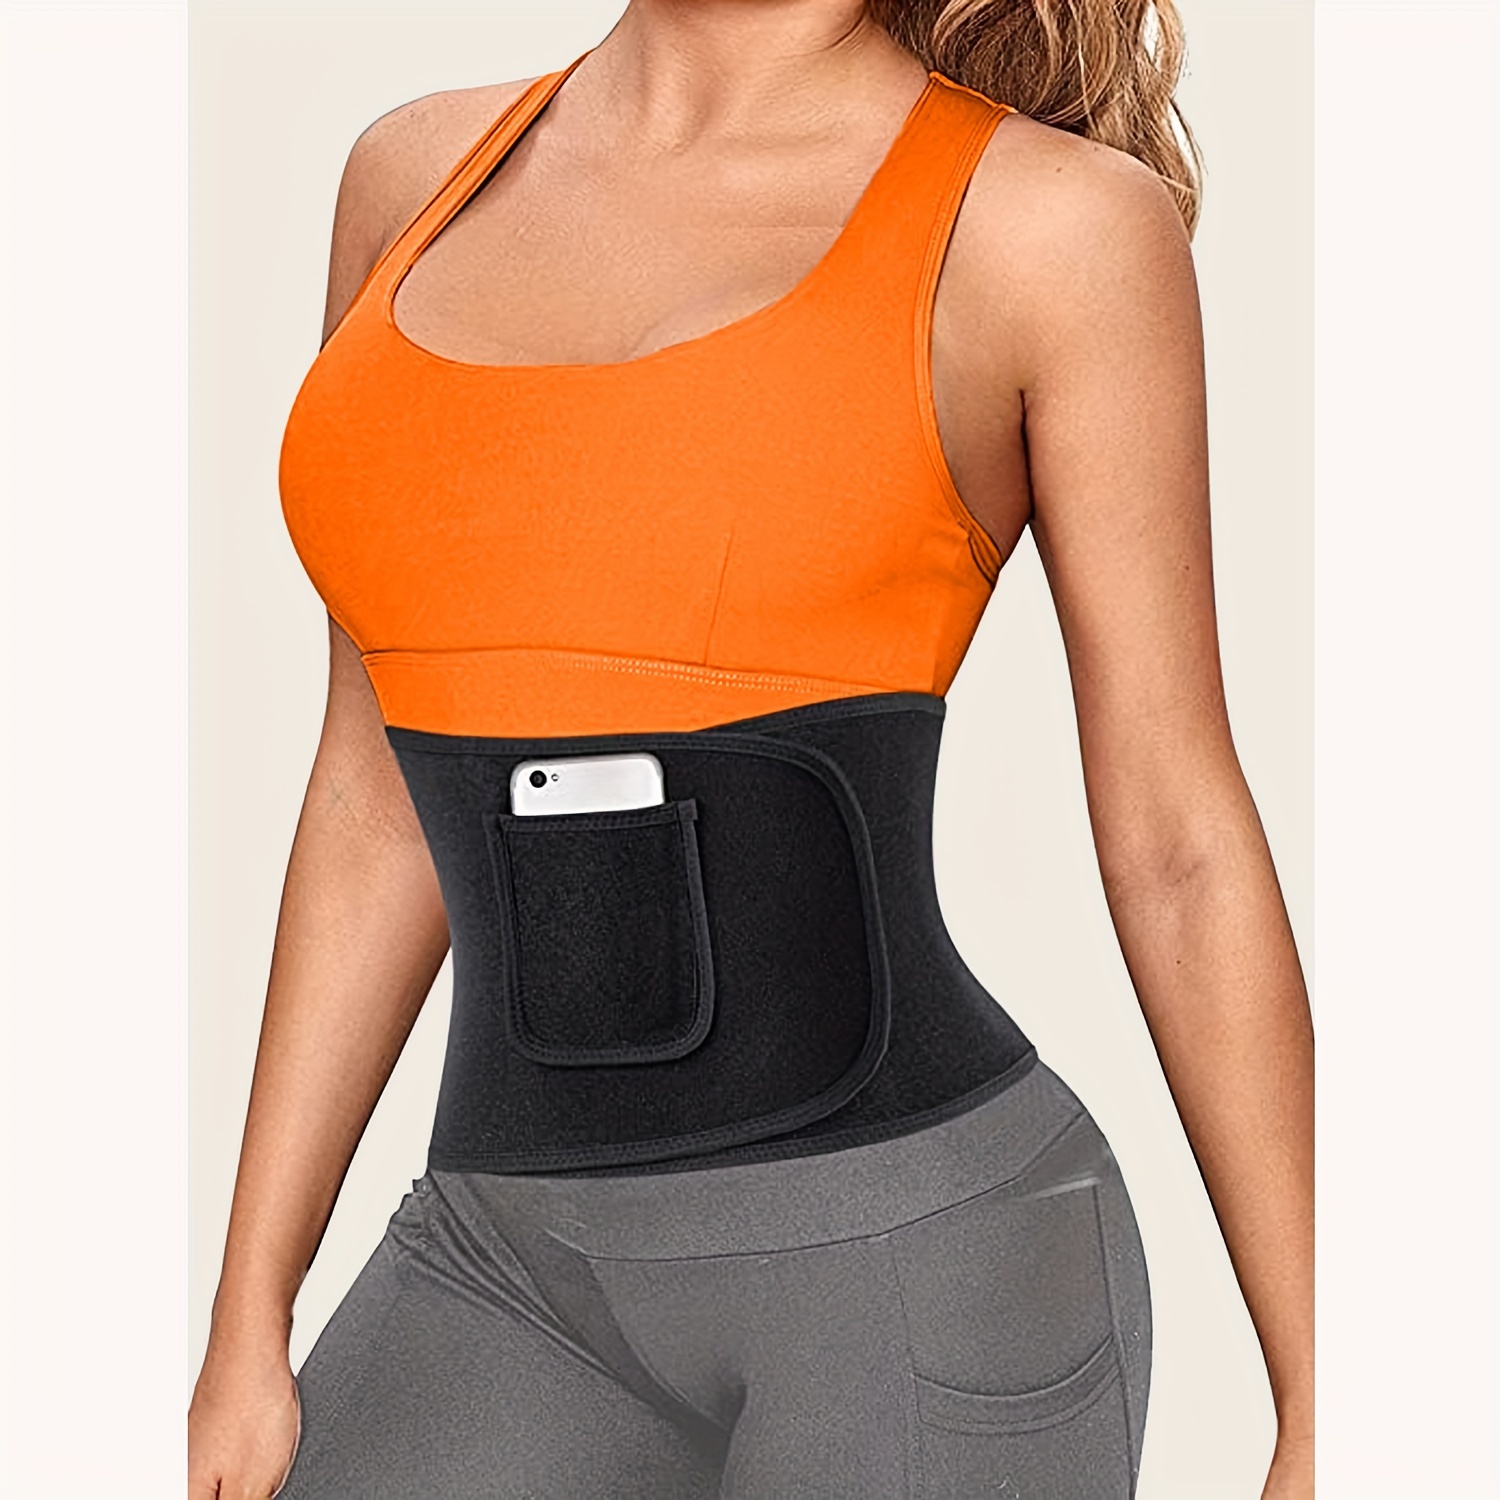 Waist Trainer for Women Lower Belly Fat, Stomach Wraps for Weight